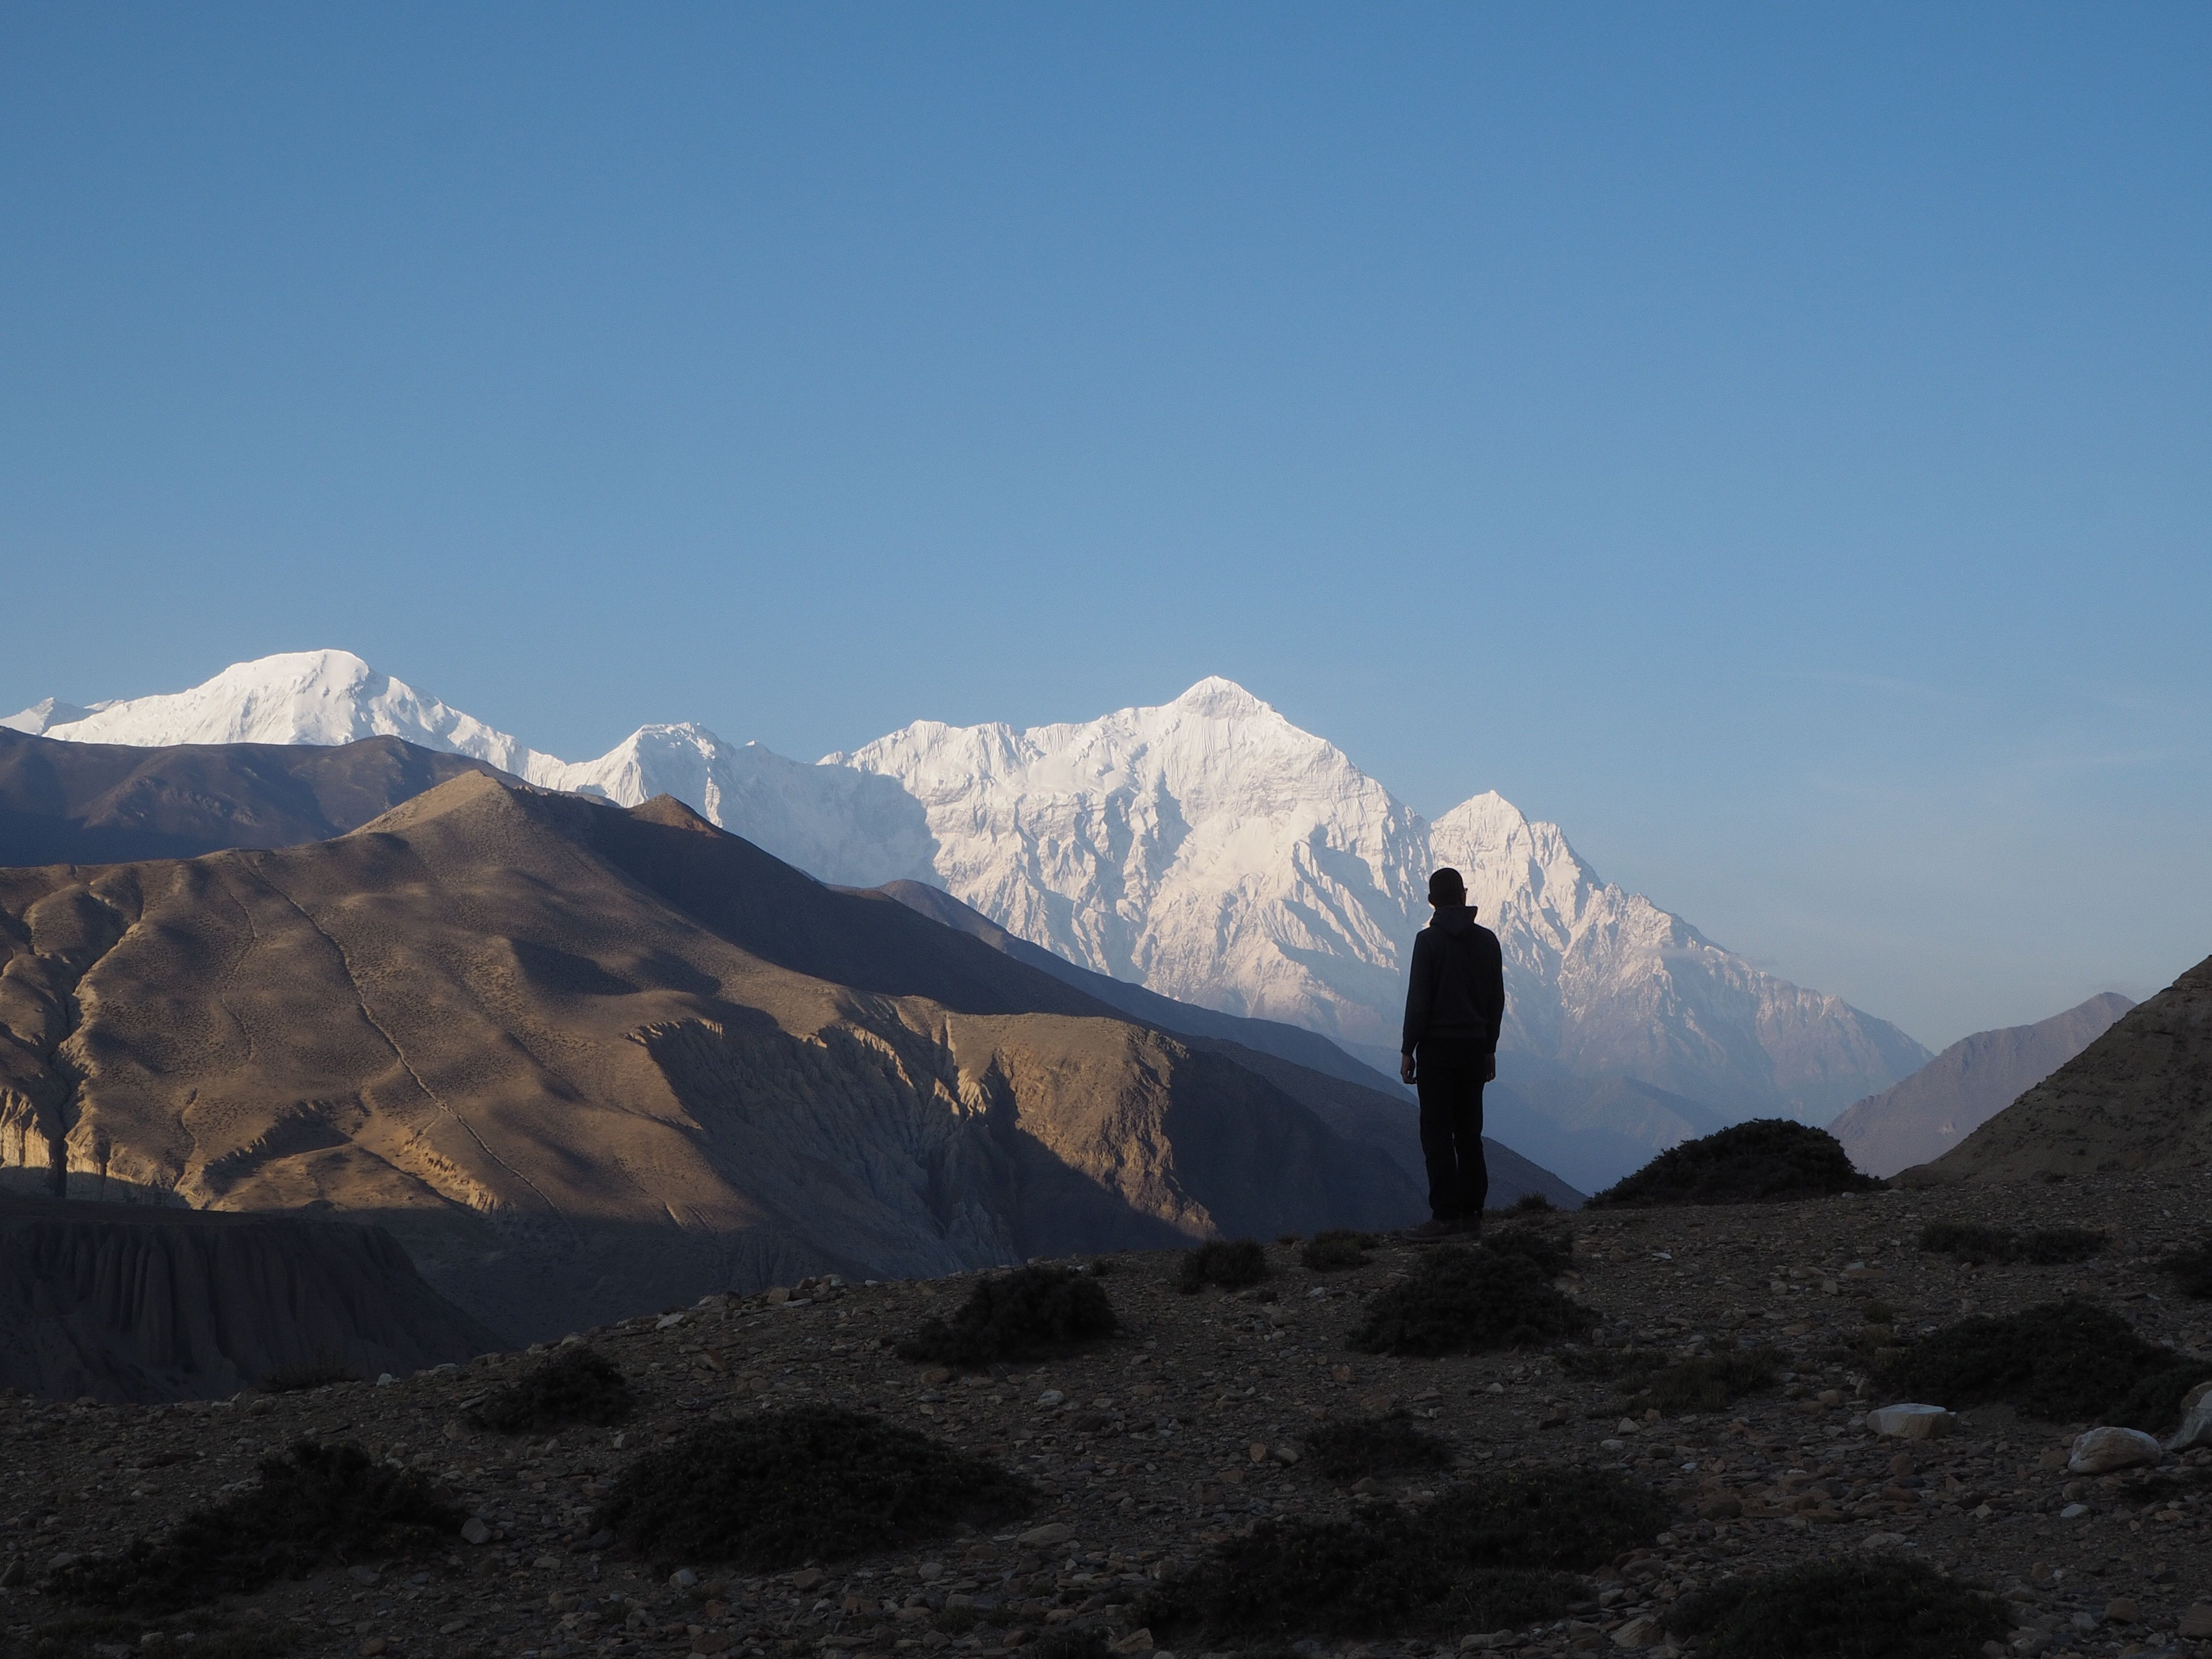 a man standing on top of a mountain with mountains in the background